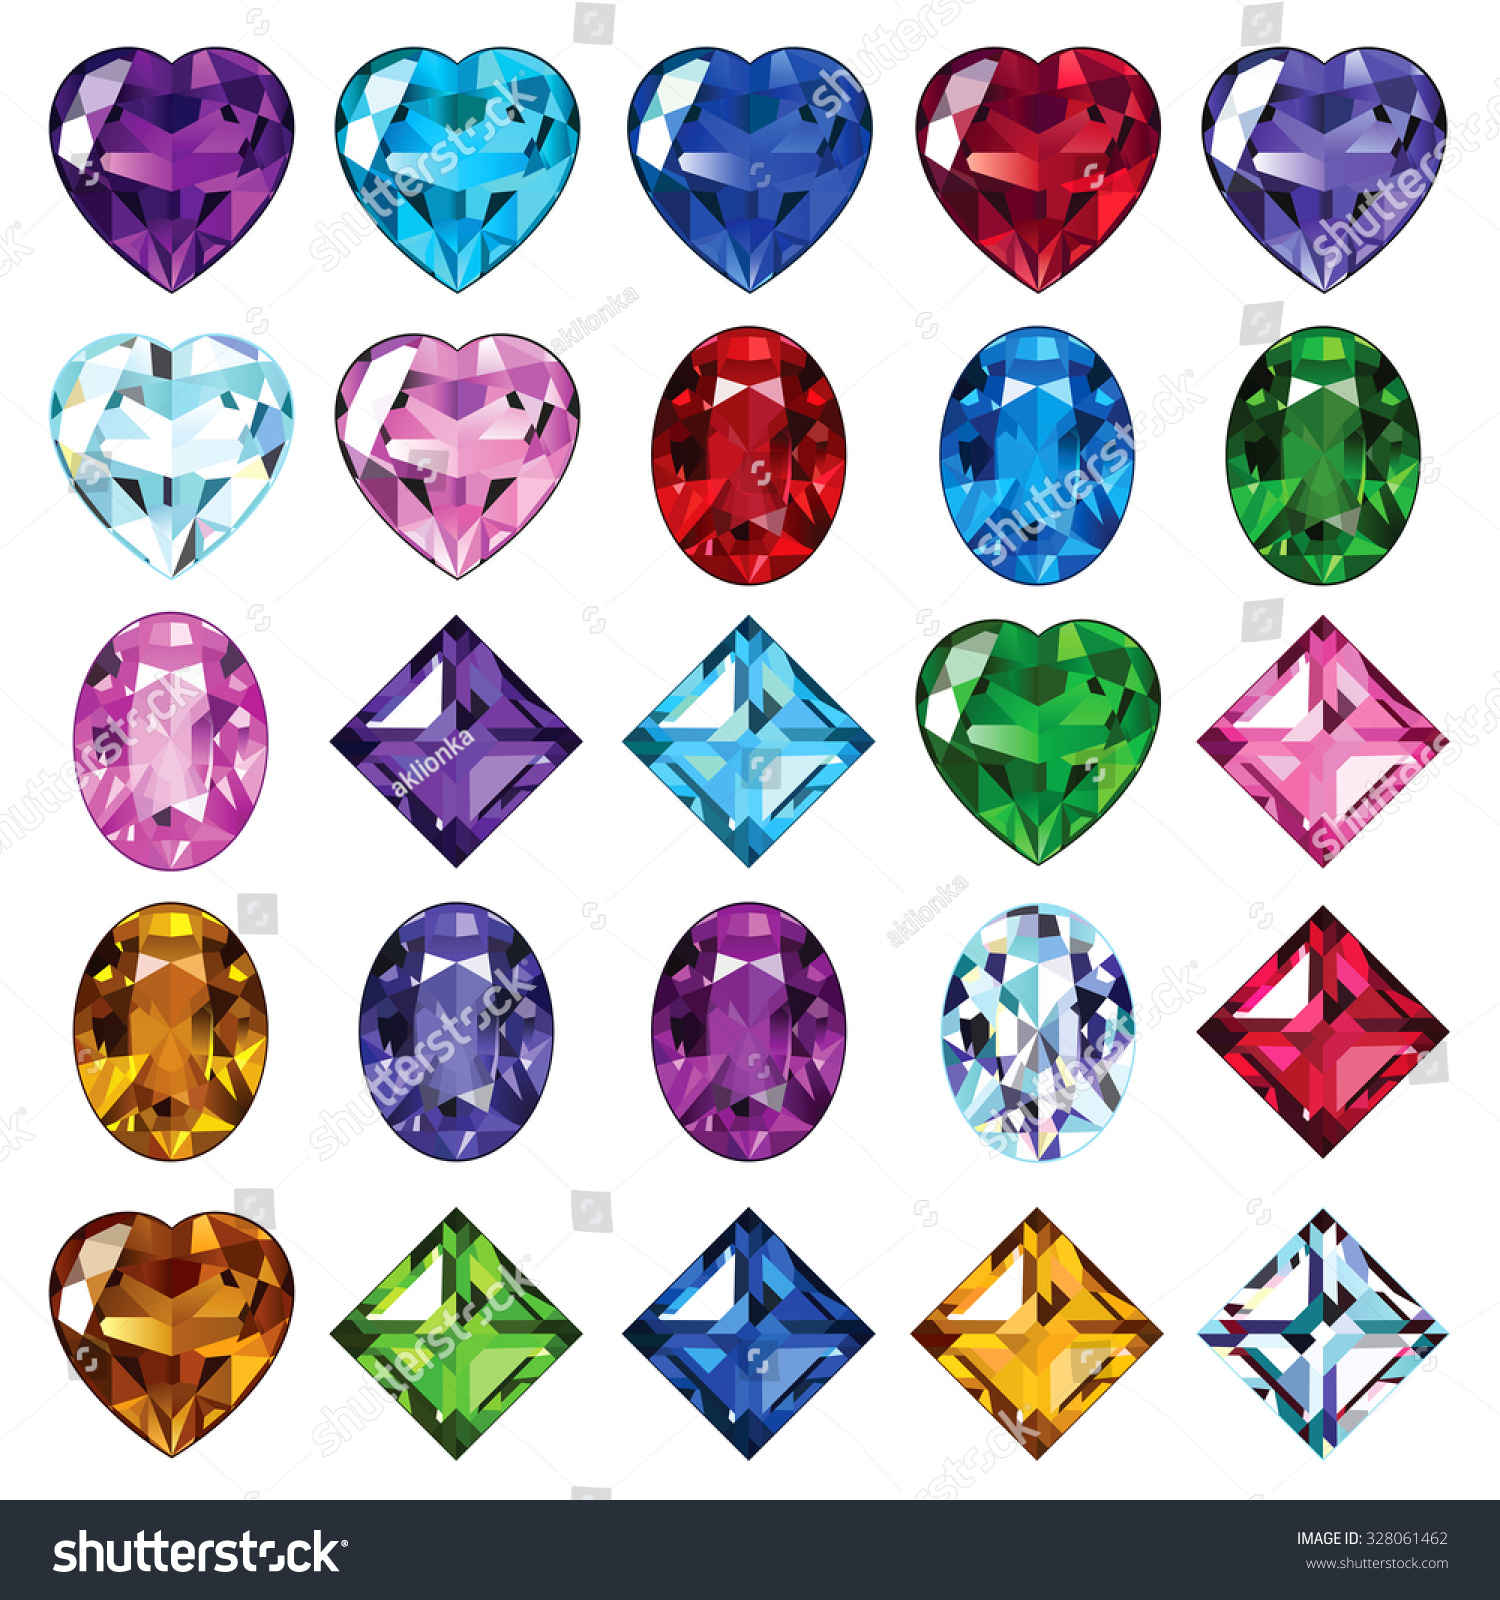 Set Of Gemstone Icons. Bright Gems Of Different Shapes. Stock Vector ...